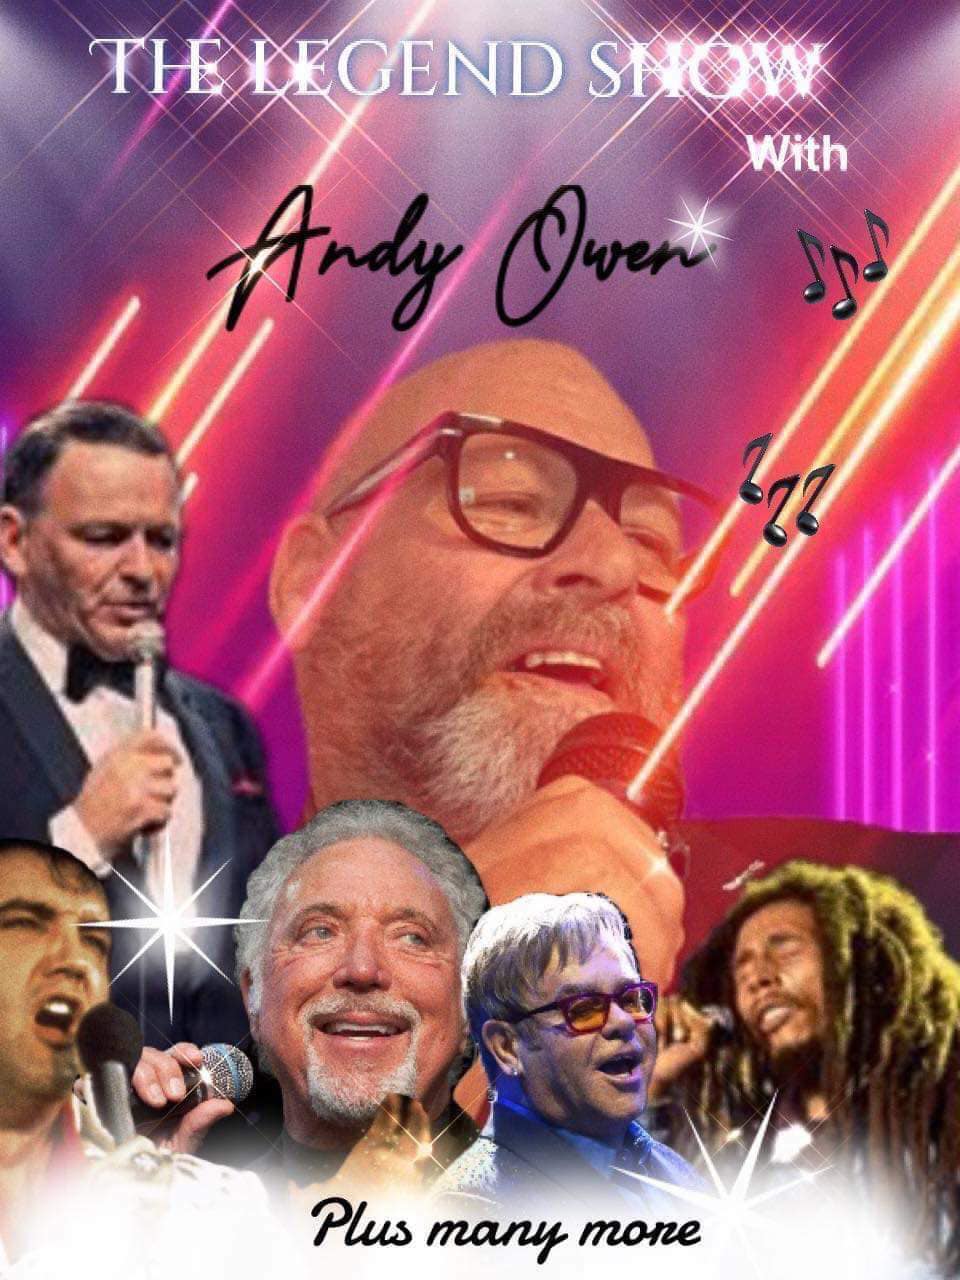 THE LEGEND SHOW with Andy Owen